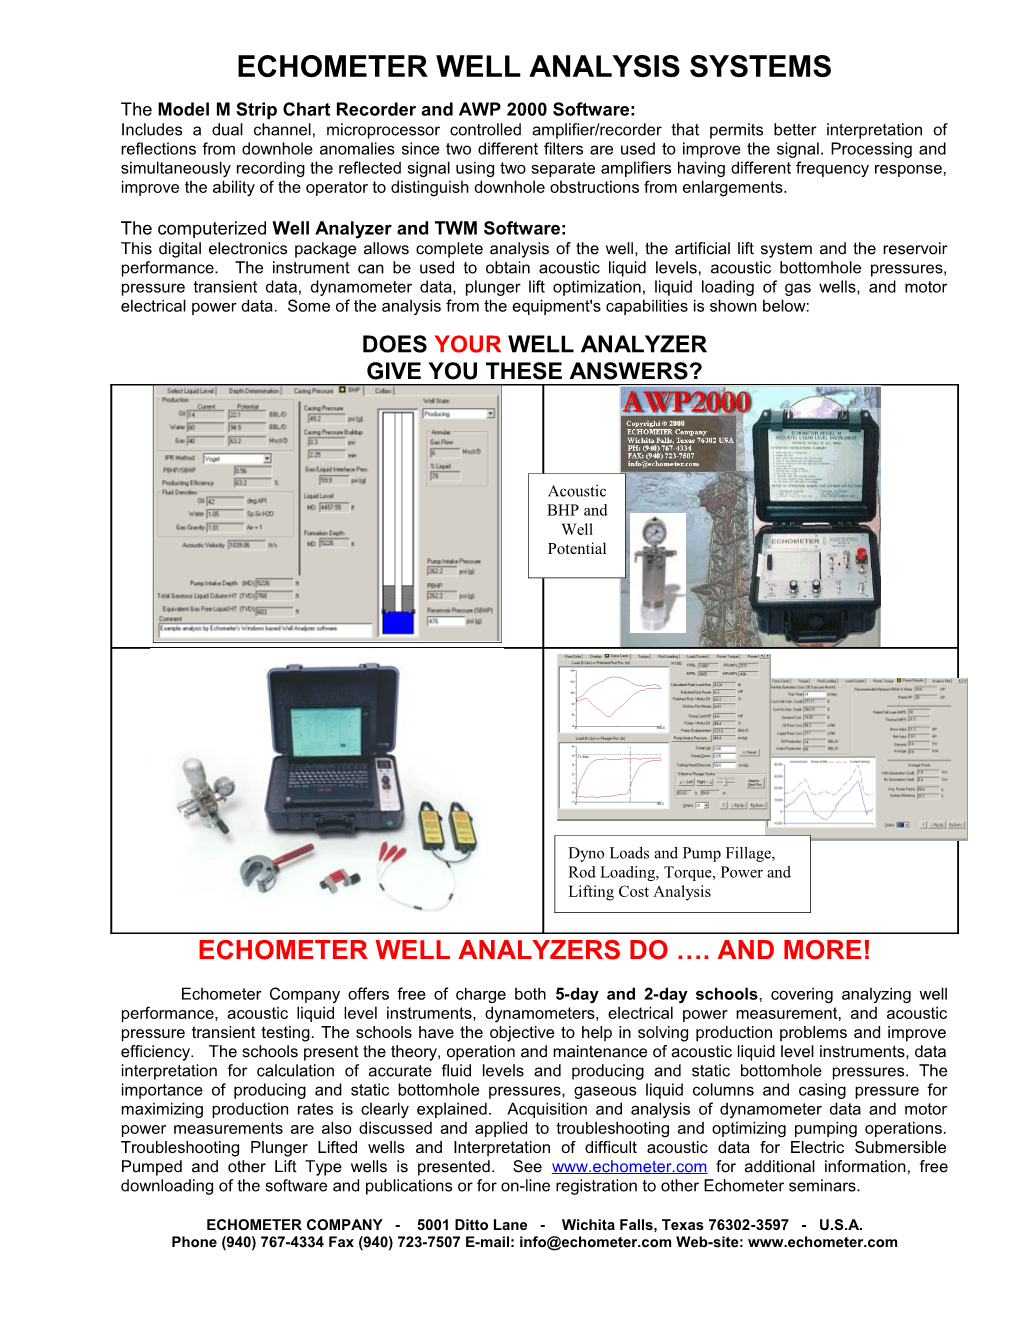 Echometer Well Analysis Systems